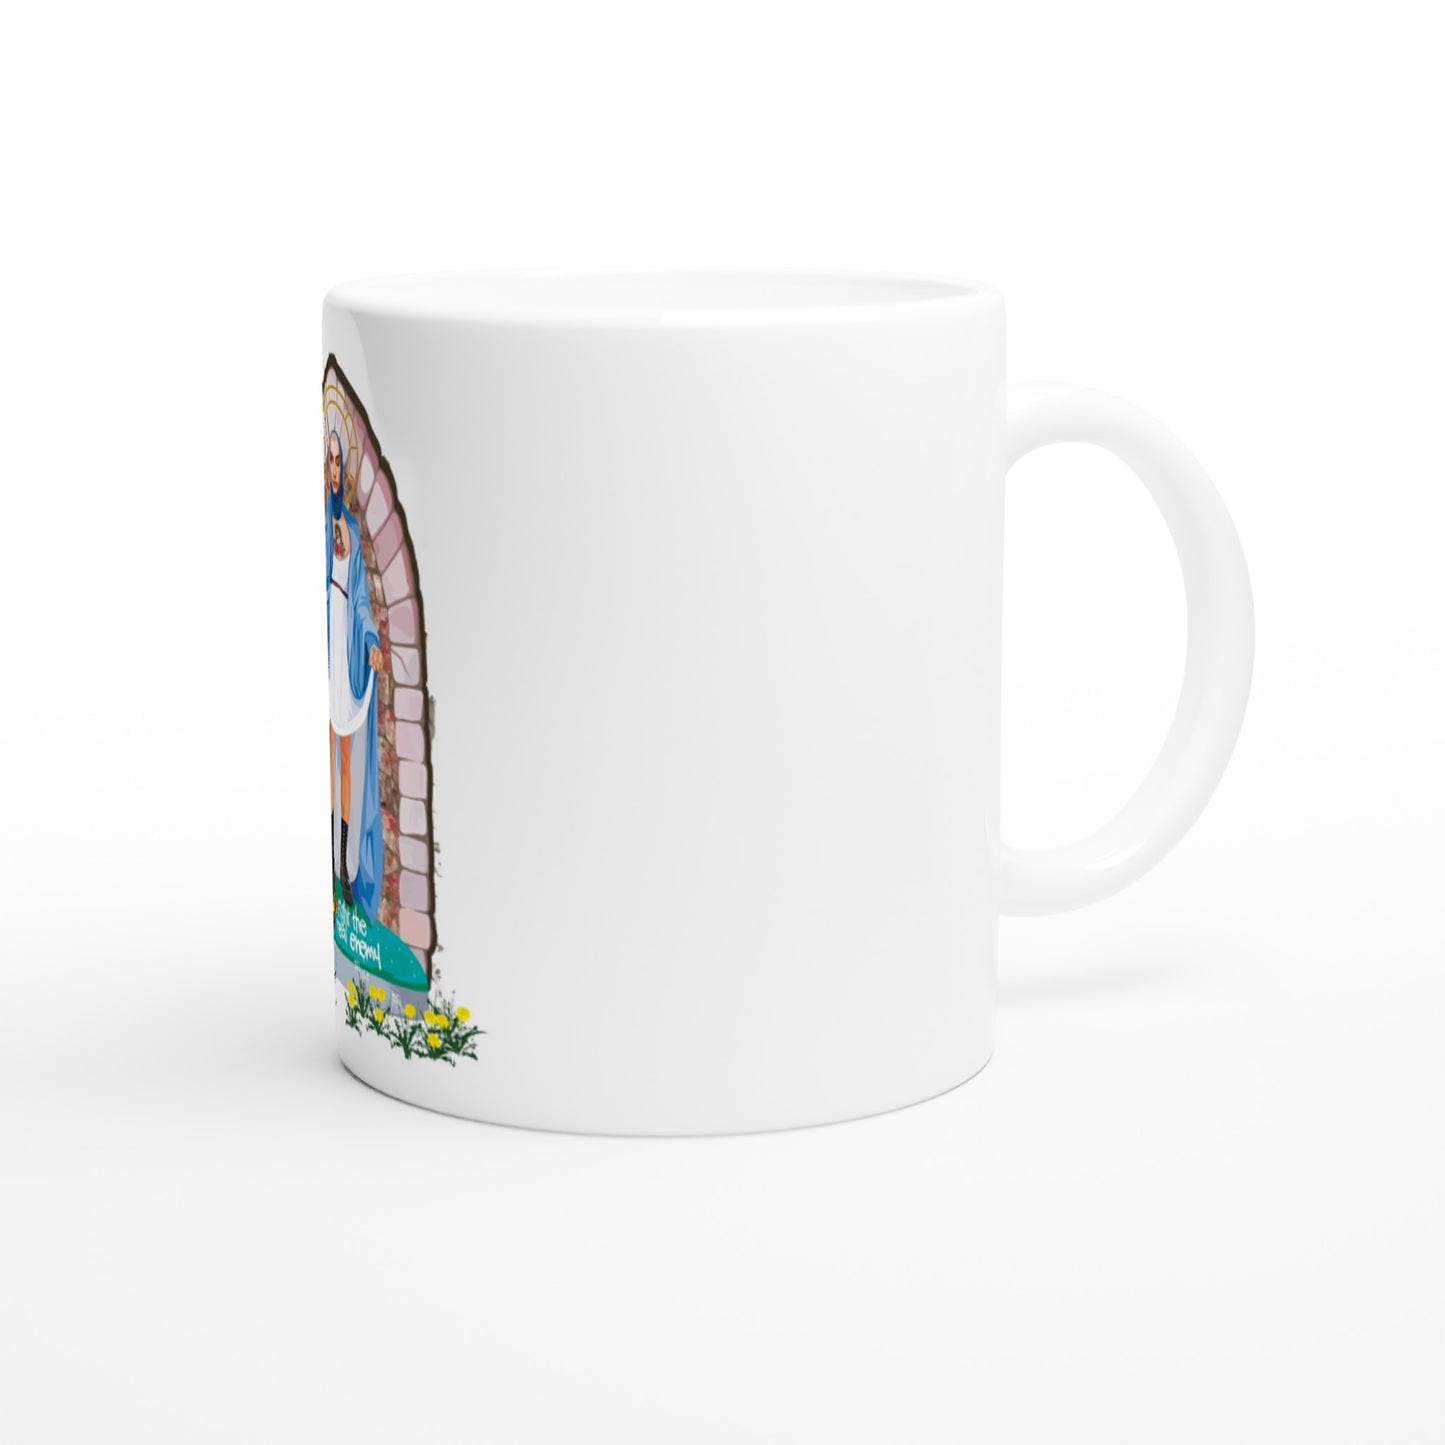 Our Lady of the Sorrows Mug